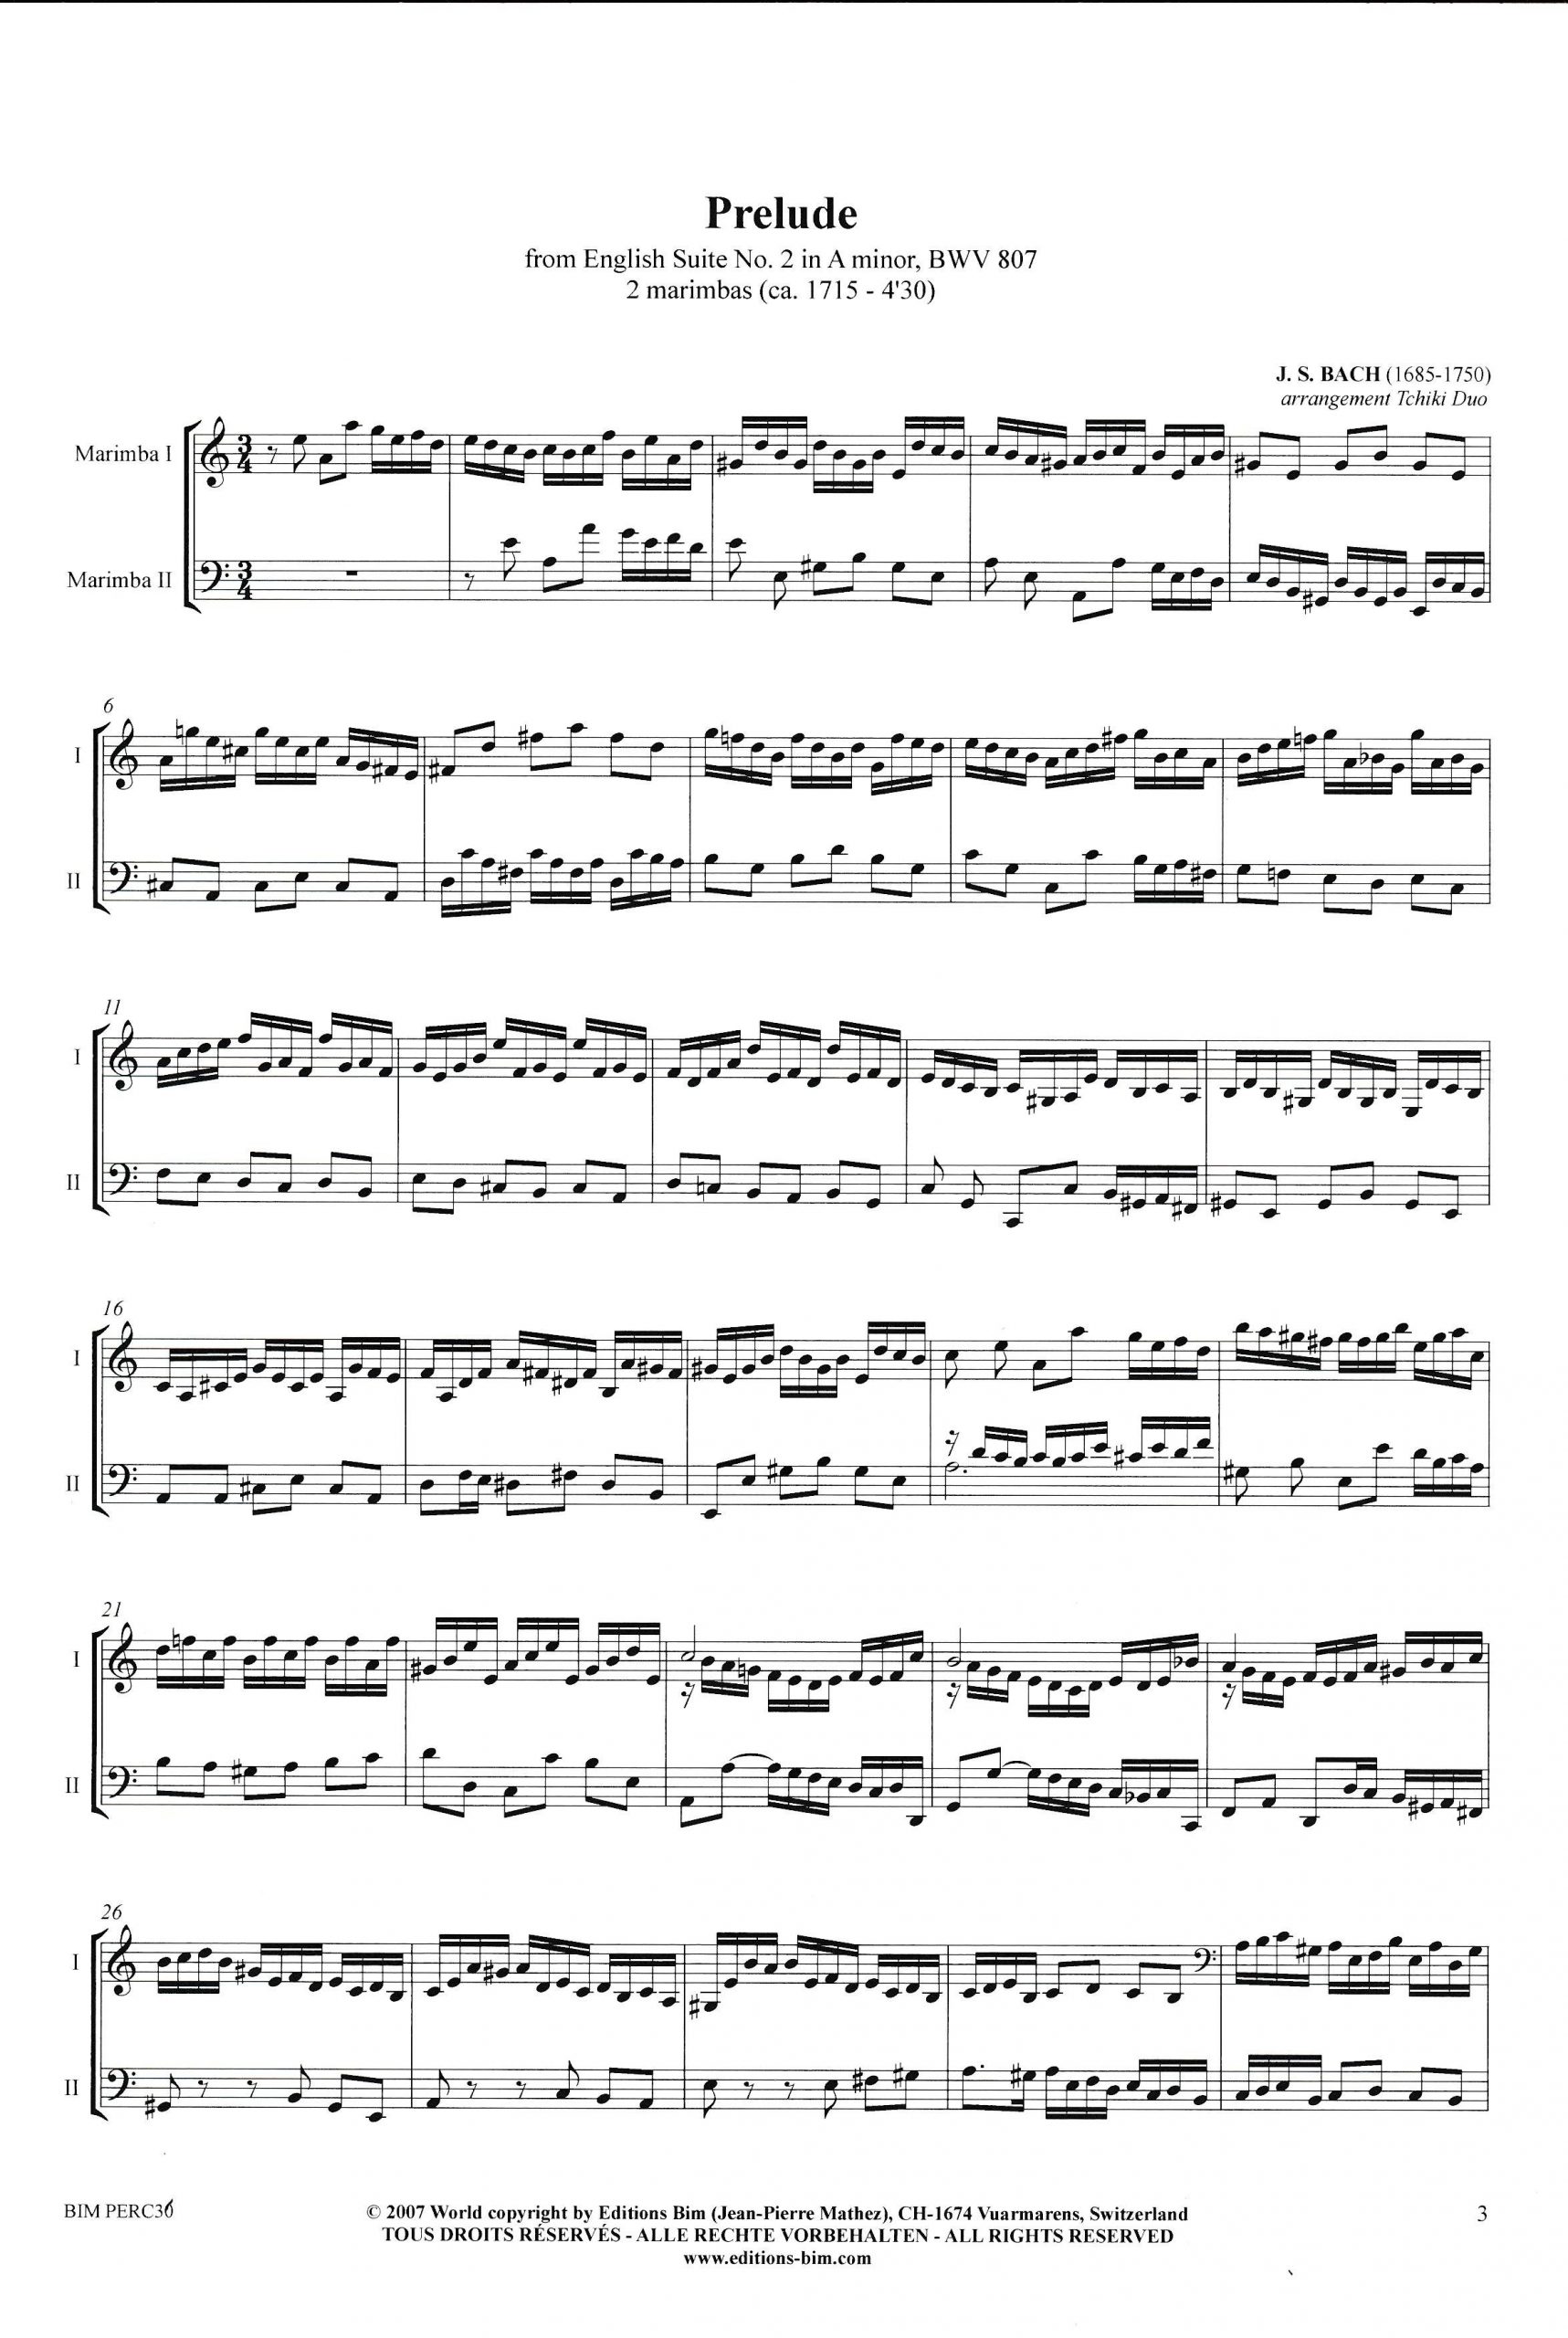 Prelude from English Suite no. 2 in A Minor